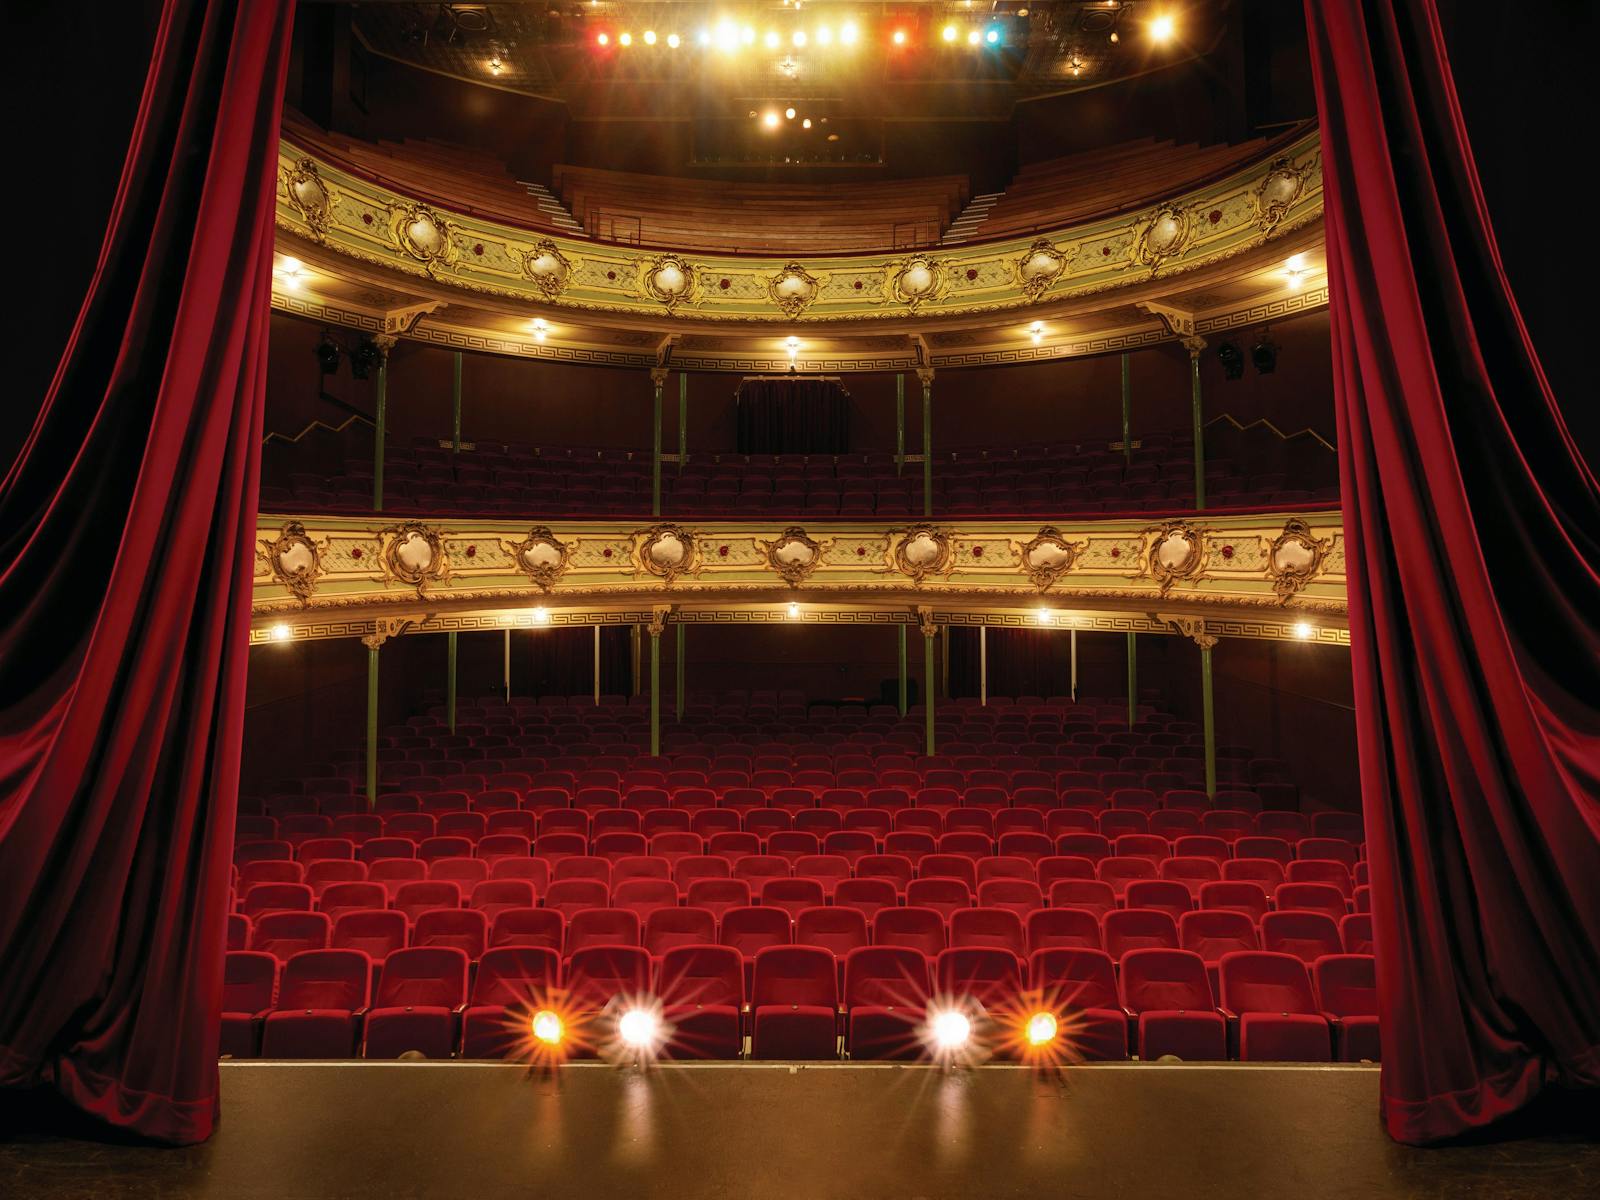 An ornate three-level theatre as viewed from the stage.